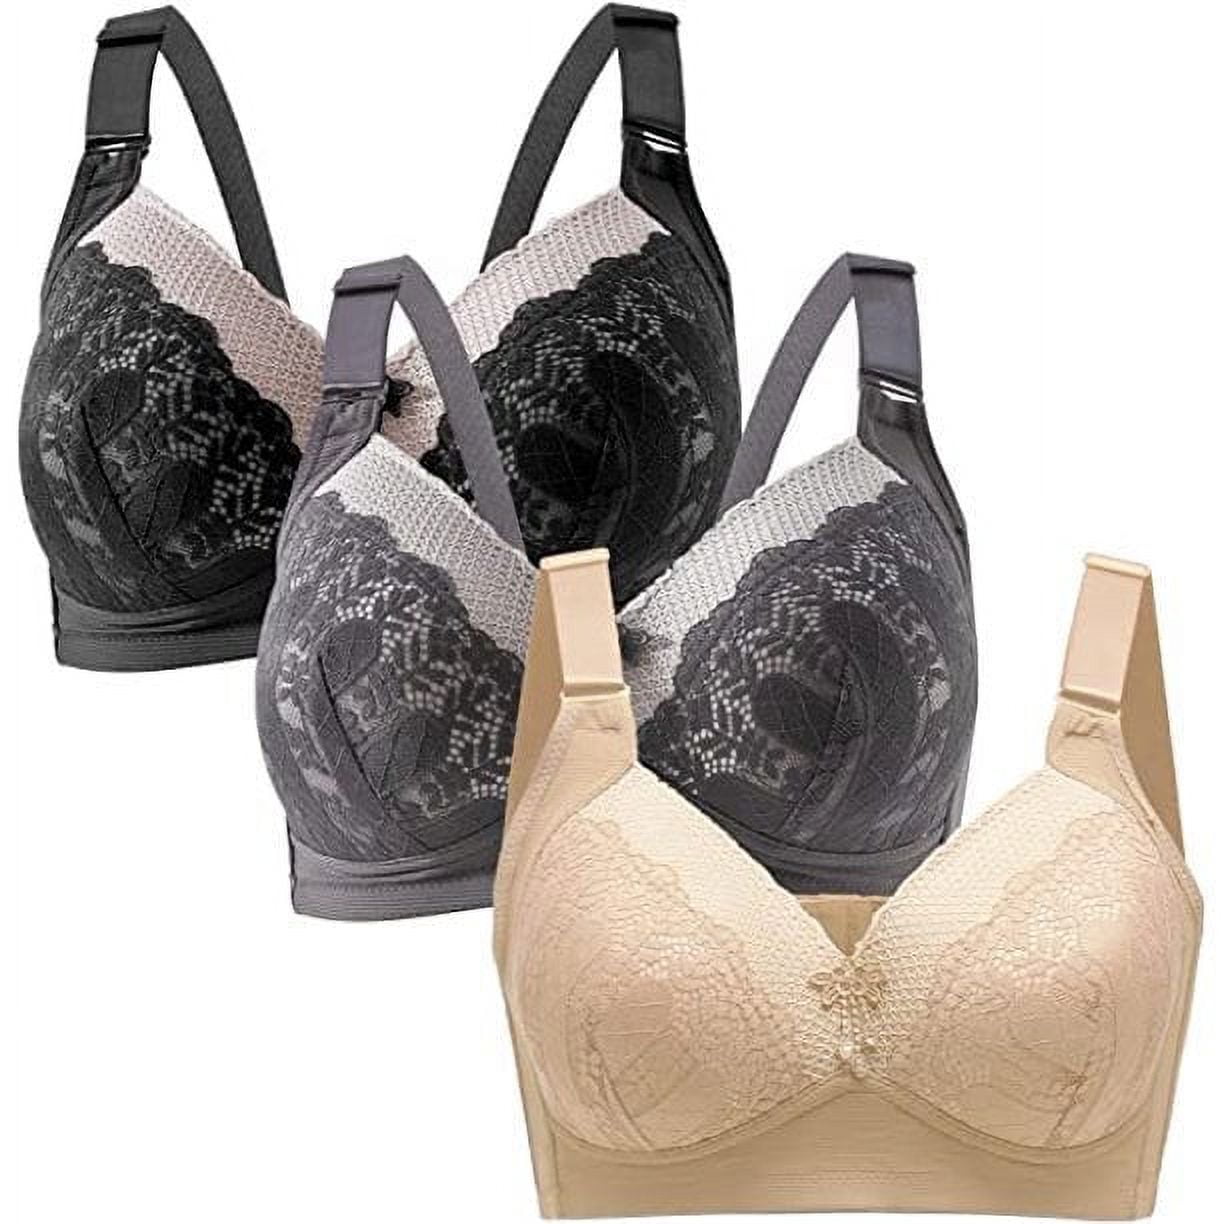 Xmarks Full Figure Plus Size Push Up Support Bra Wirefree Underwear US  38C-42D 